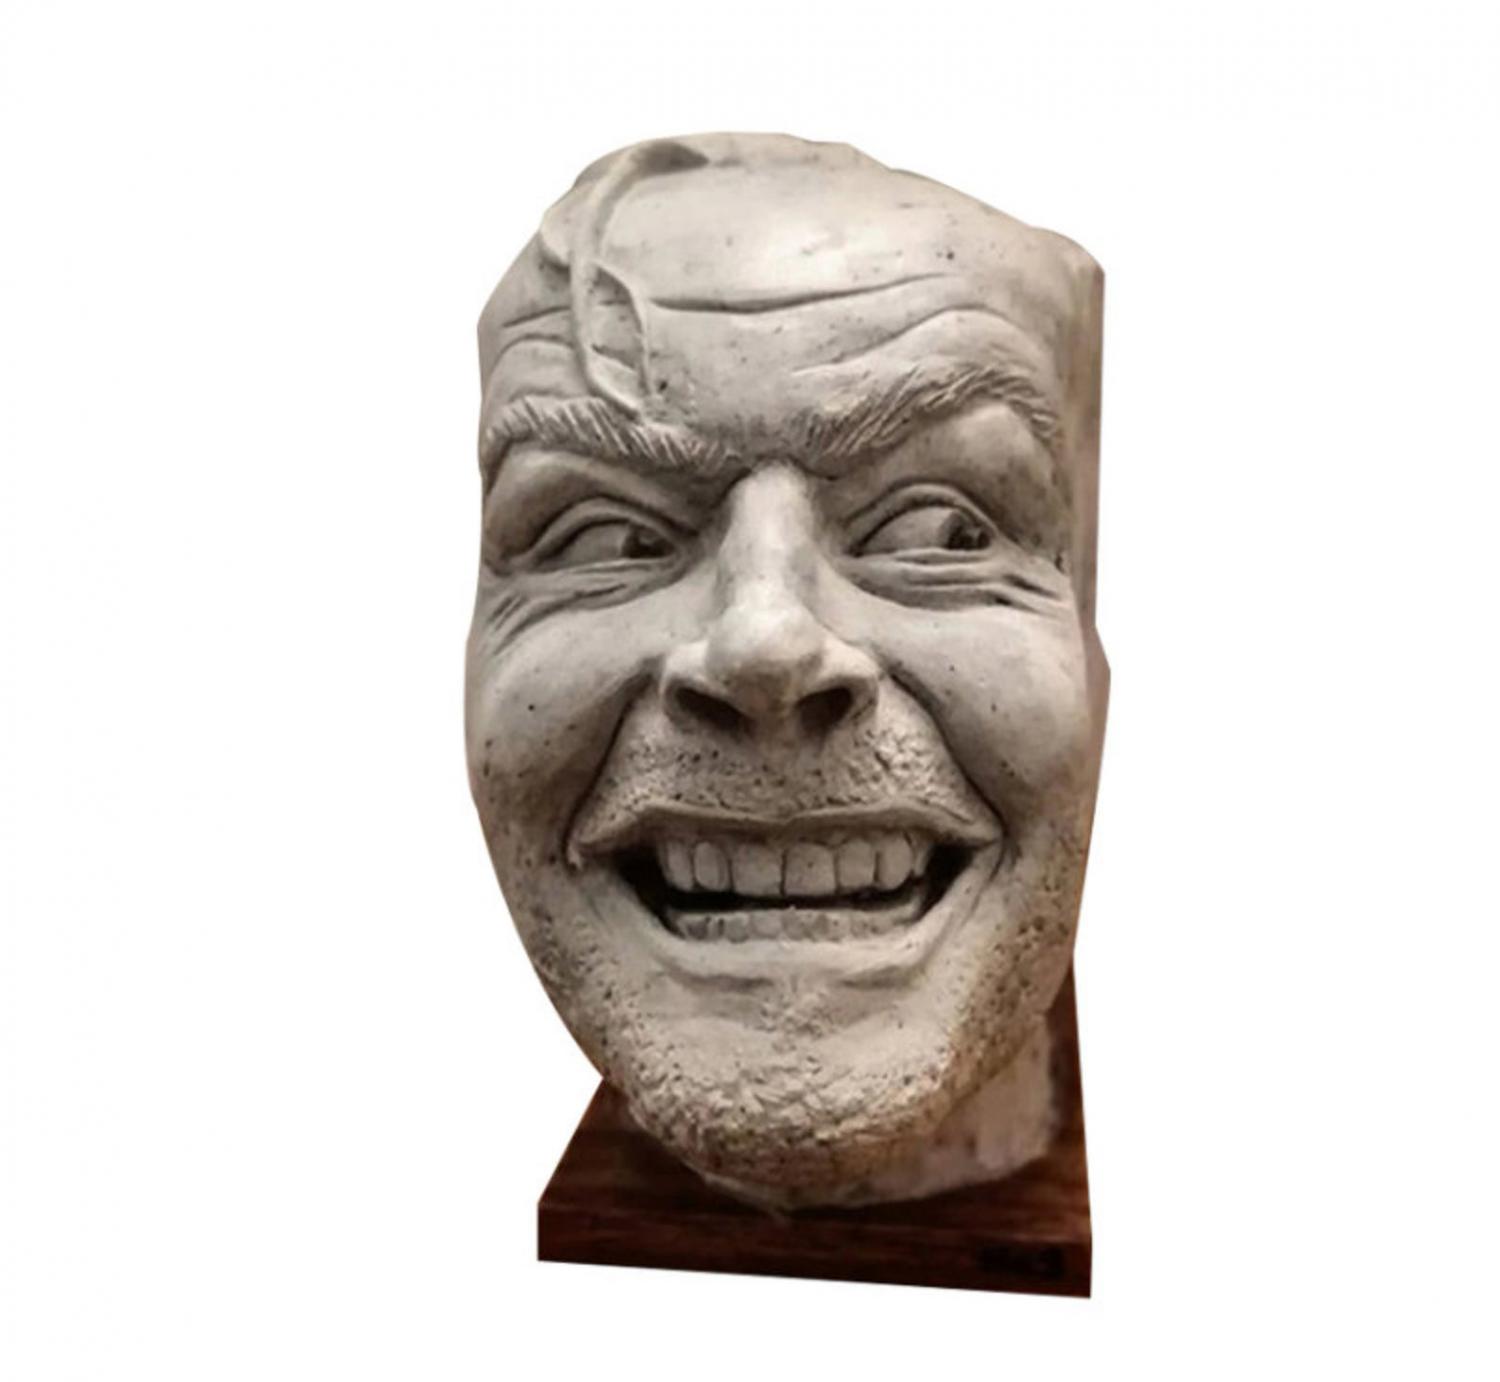 Floepx Jack Nicholson Sculpture Book Shelf Funny Ornement of The Shining Bookend Library Here?s Johnny Sculpture Résine Bureau Ornement Cute Funny Book Shelf on Your Study Décoration Living Room